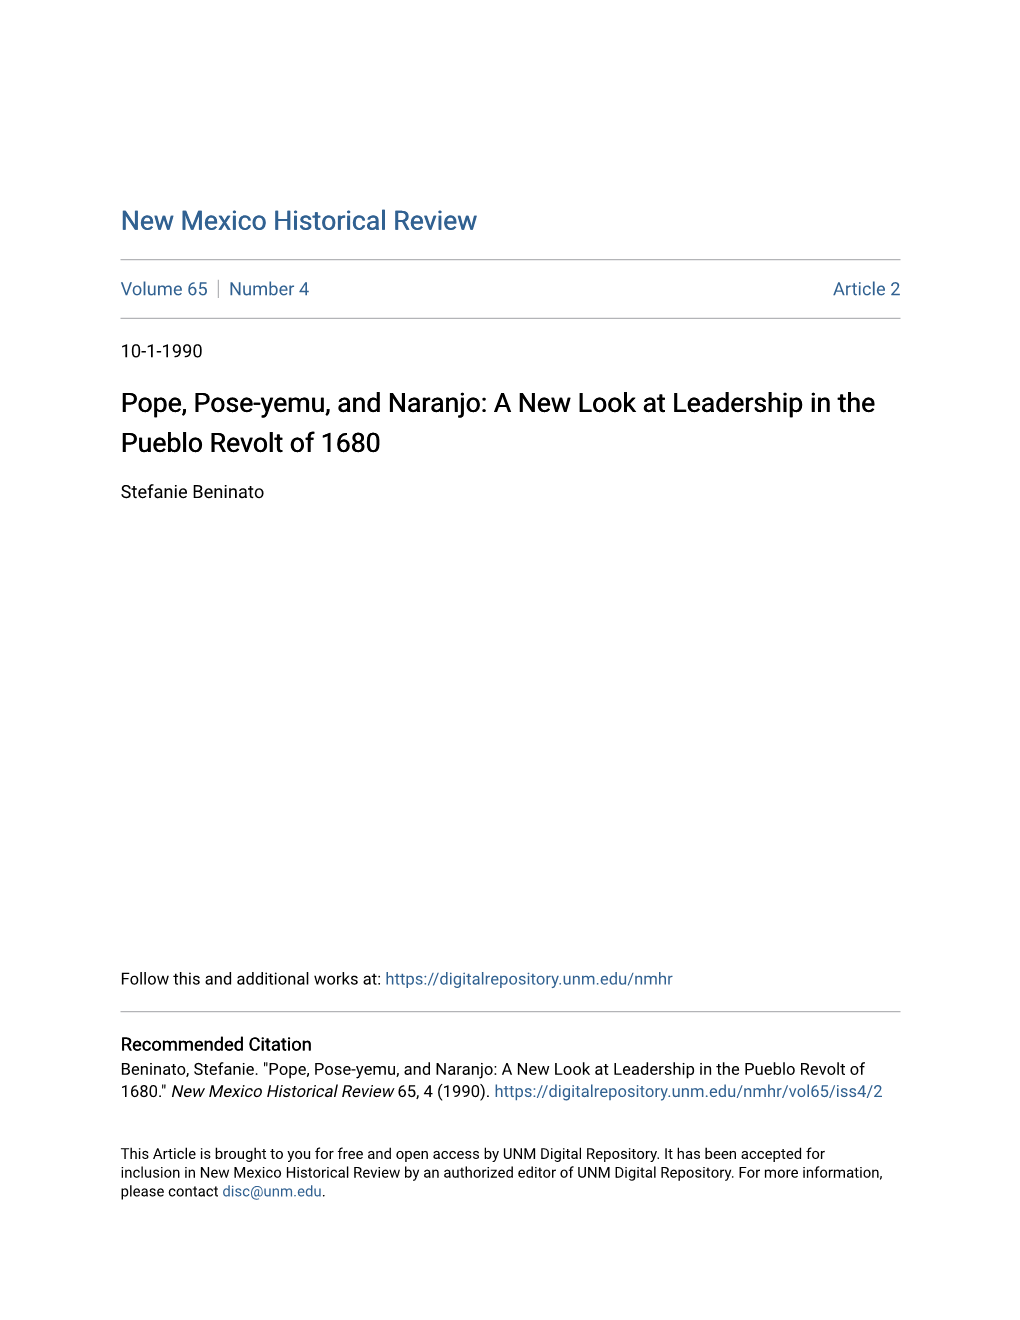 Pope, Pose-Yemu, and Naranjo: a New Look at Leadership in the Pueblo Revolt of 1680